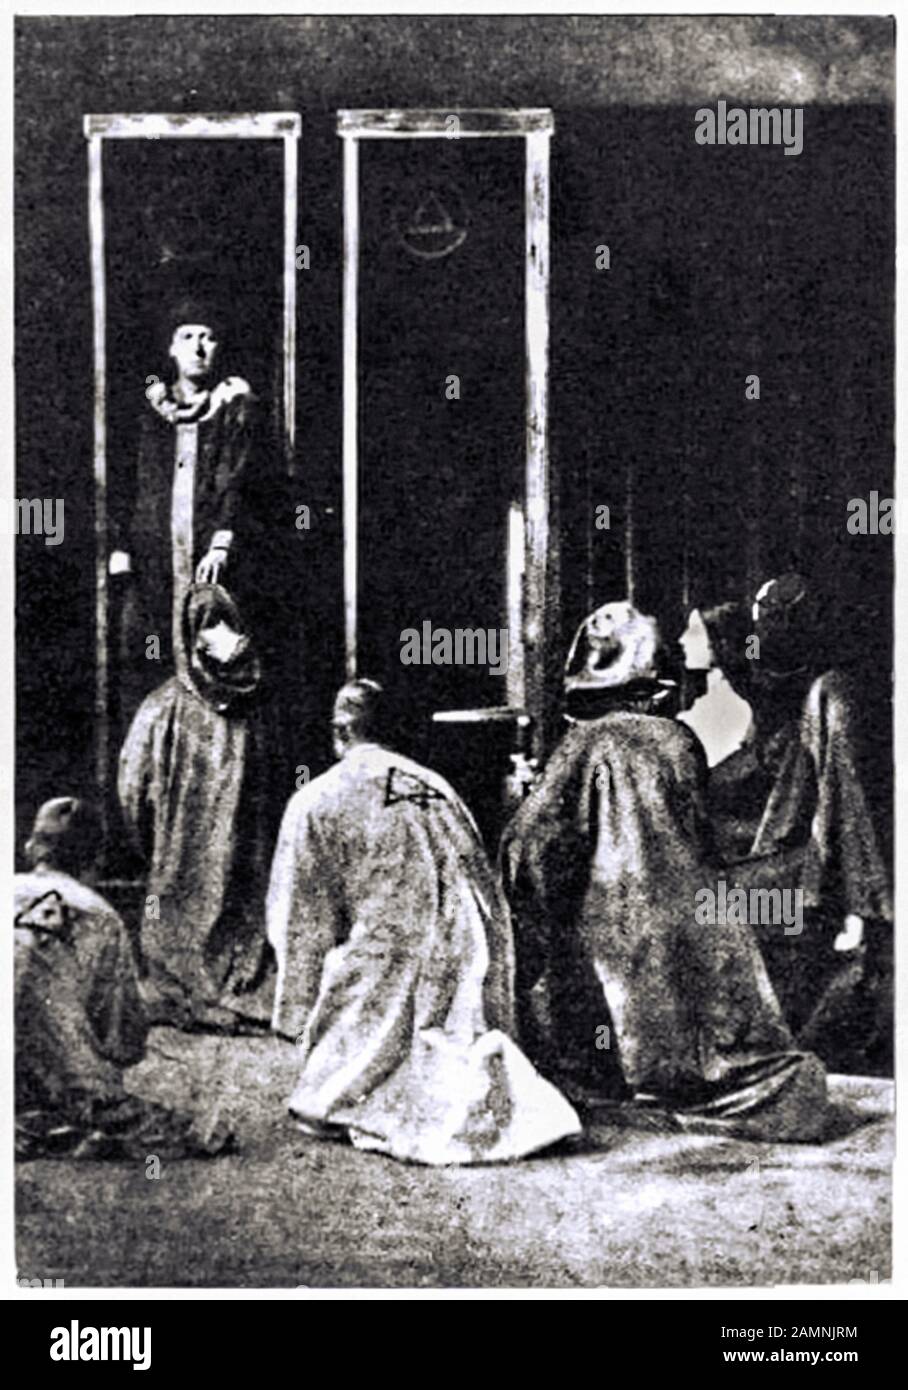 British occultist Aleister Crowley (1875-1947) performing the third act of the Rite of Saturn, part of the Rites of Eleusis, performed at Caxton Hall, London in October 1910 with Leila Waddell (1880-1932), Joan Hayes and Victor Benjamin Neuburg (1883-1940). Stock Photo